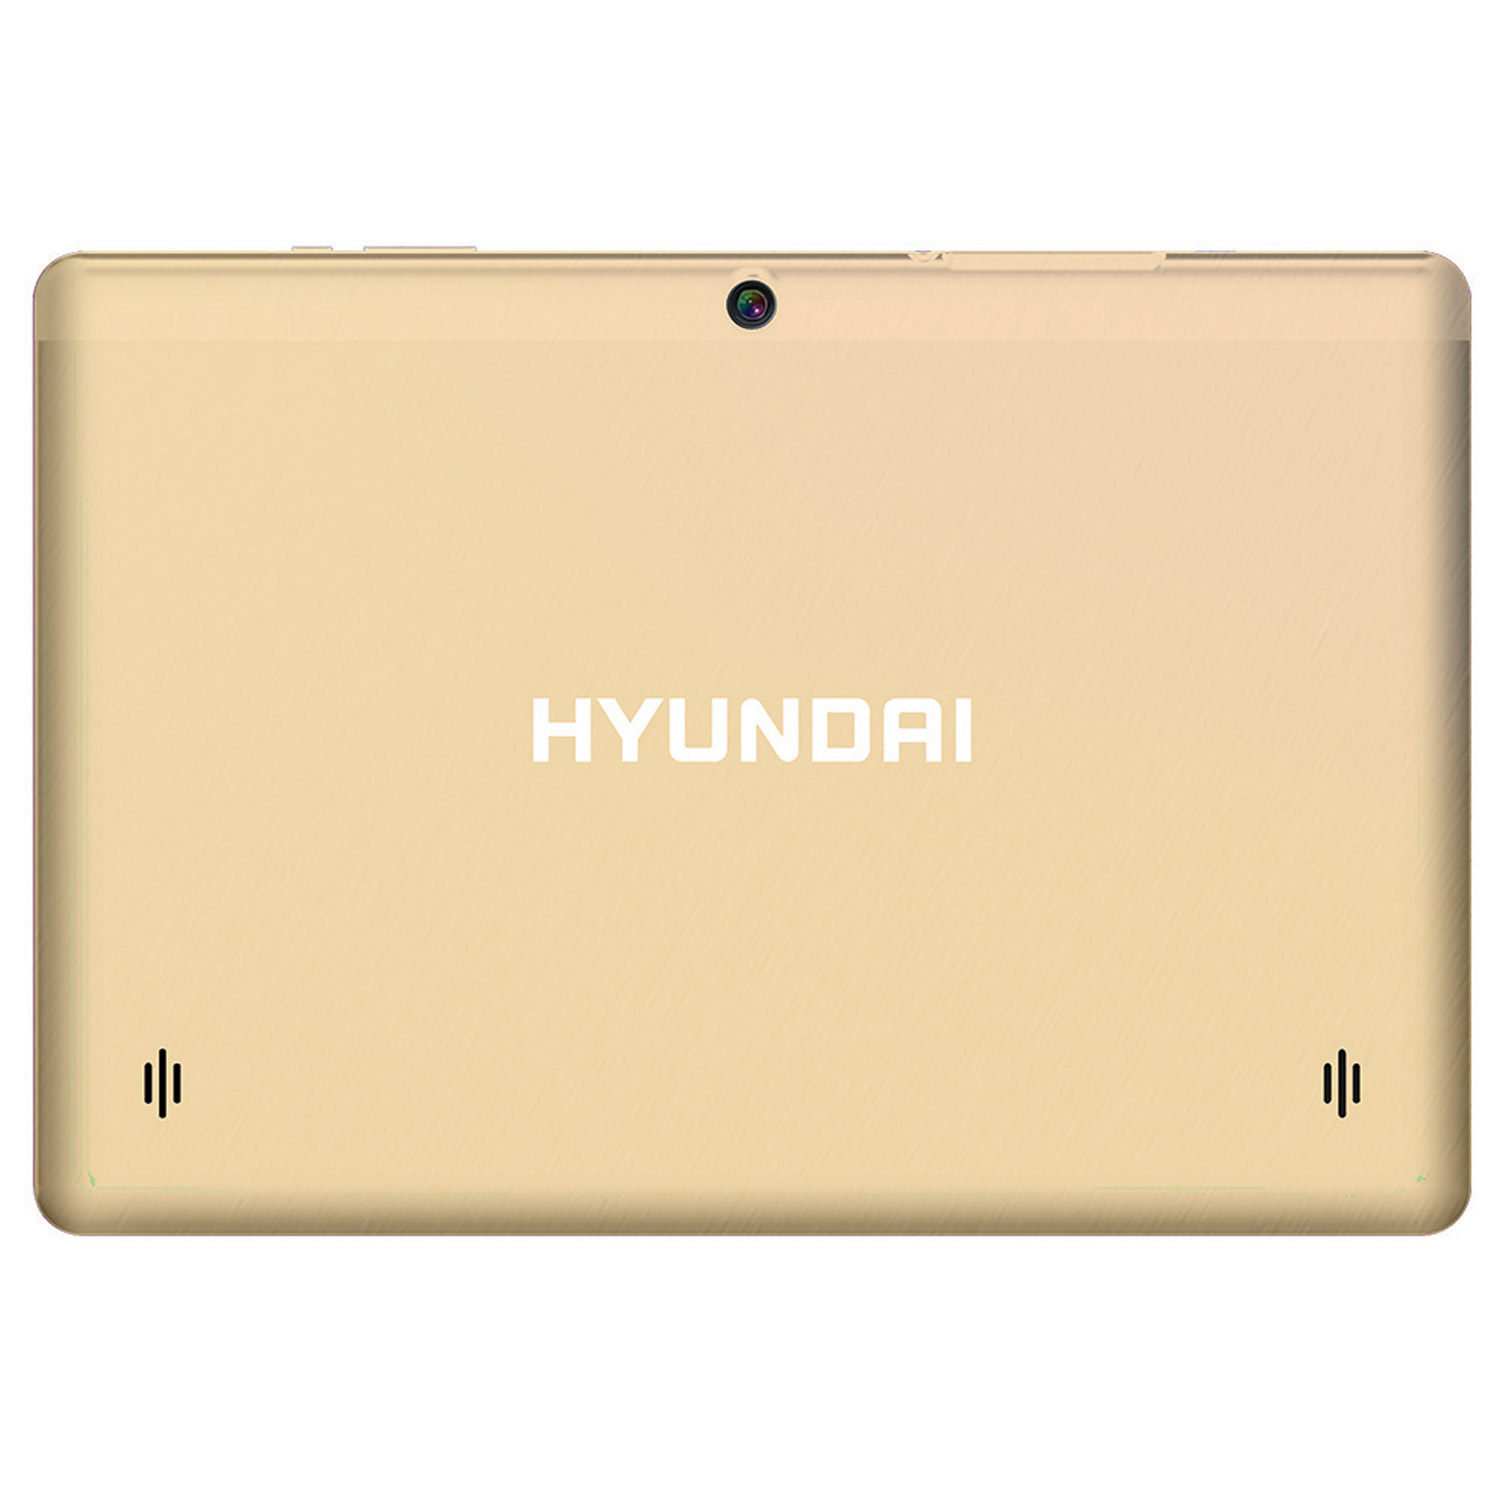 Hyundai Technology Koral 10X3 10” HD Tablet, Android 9.0 Pie, 2 GB RAM, 32 GB Storage, Dual Camera, Quad-Core Processor, Wi-Fi, Android 9.0, Gold - image 3 of 5